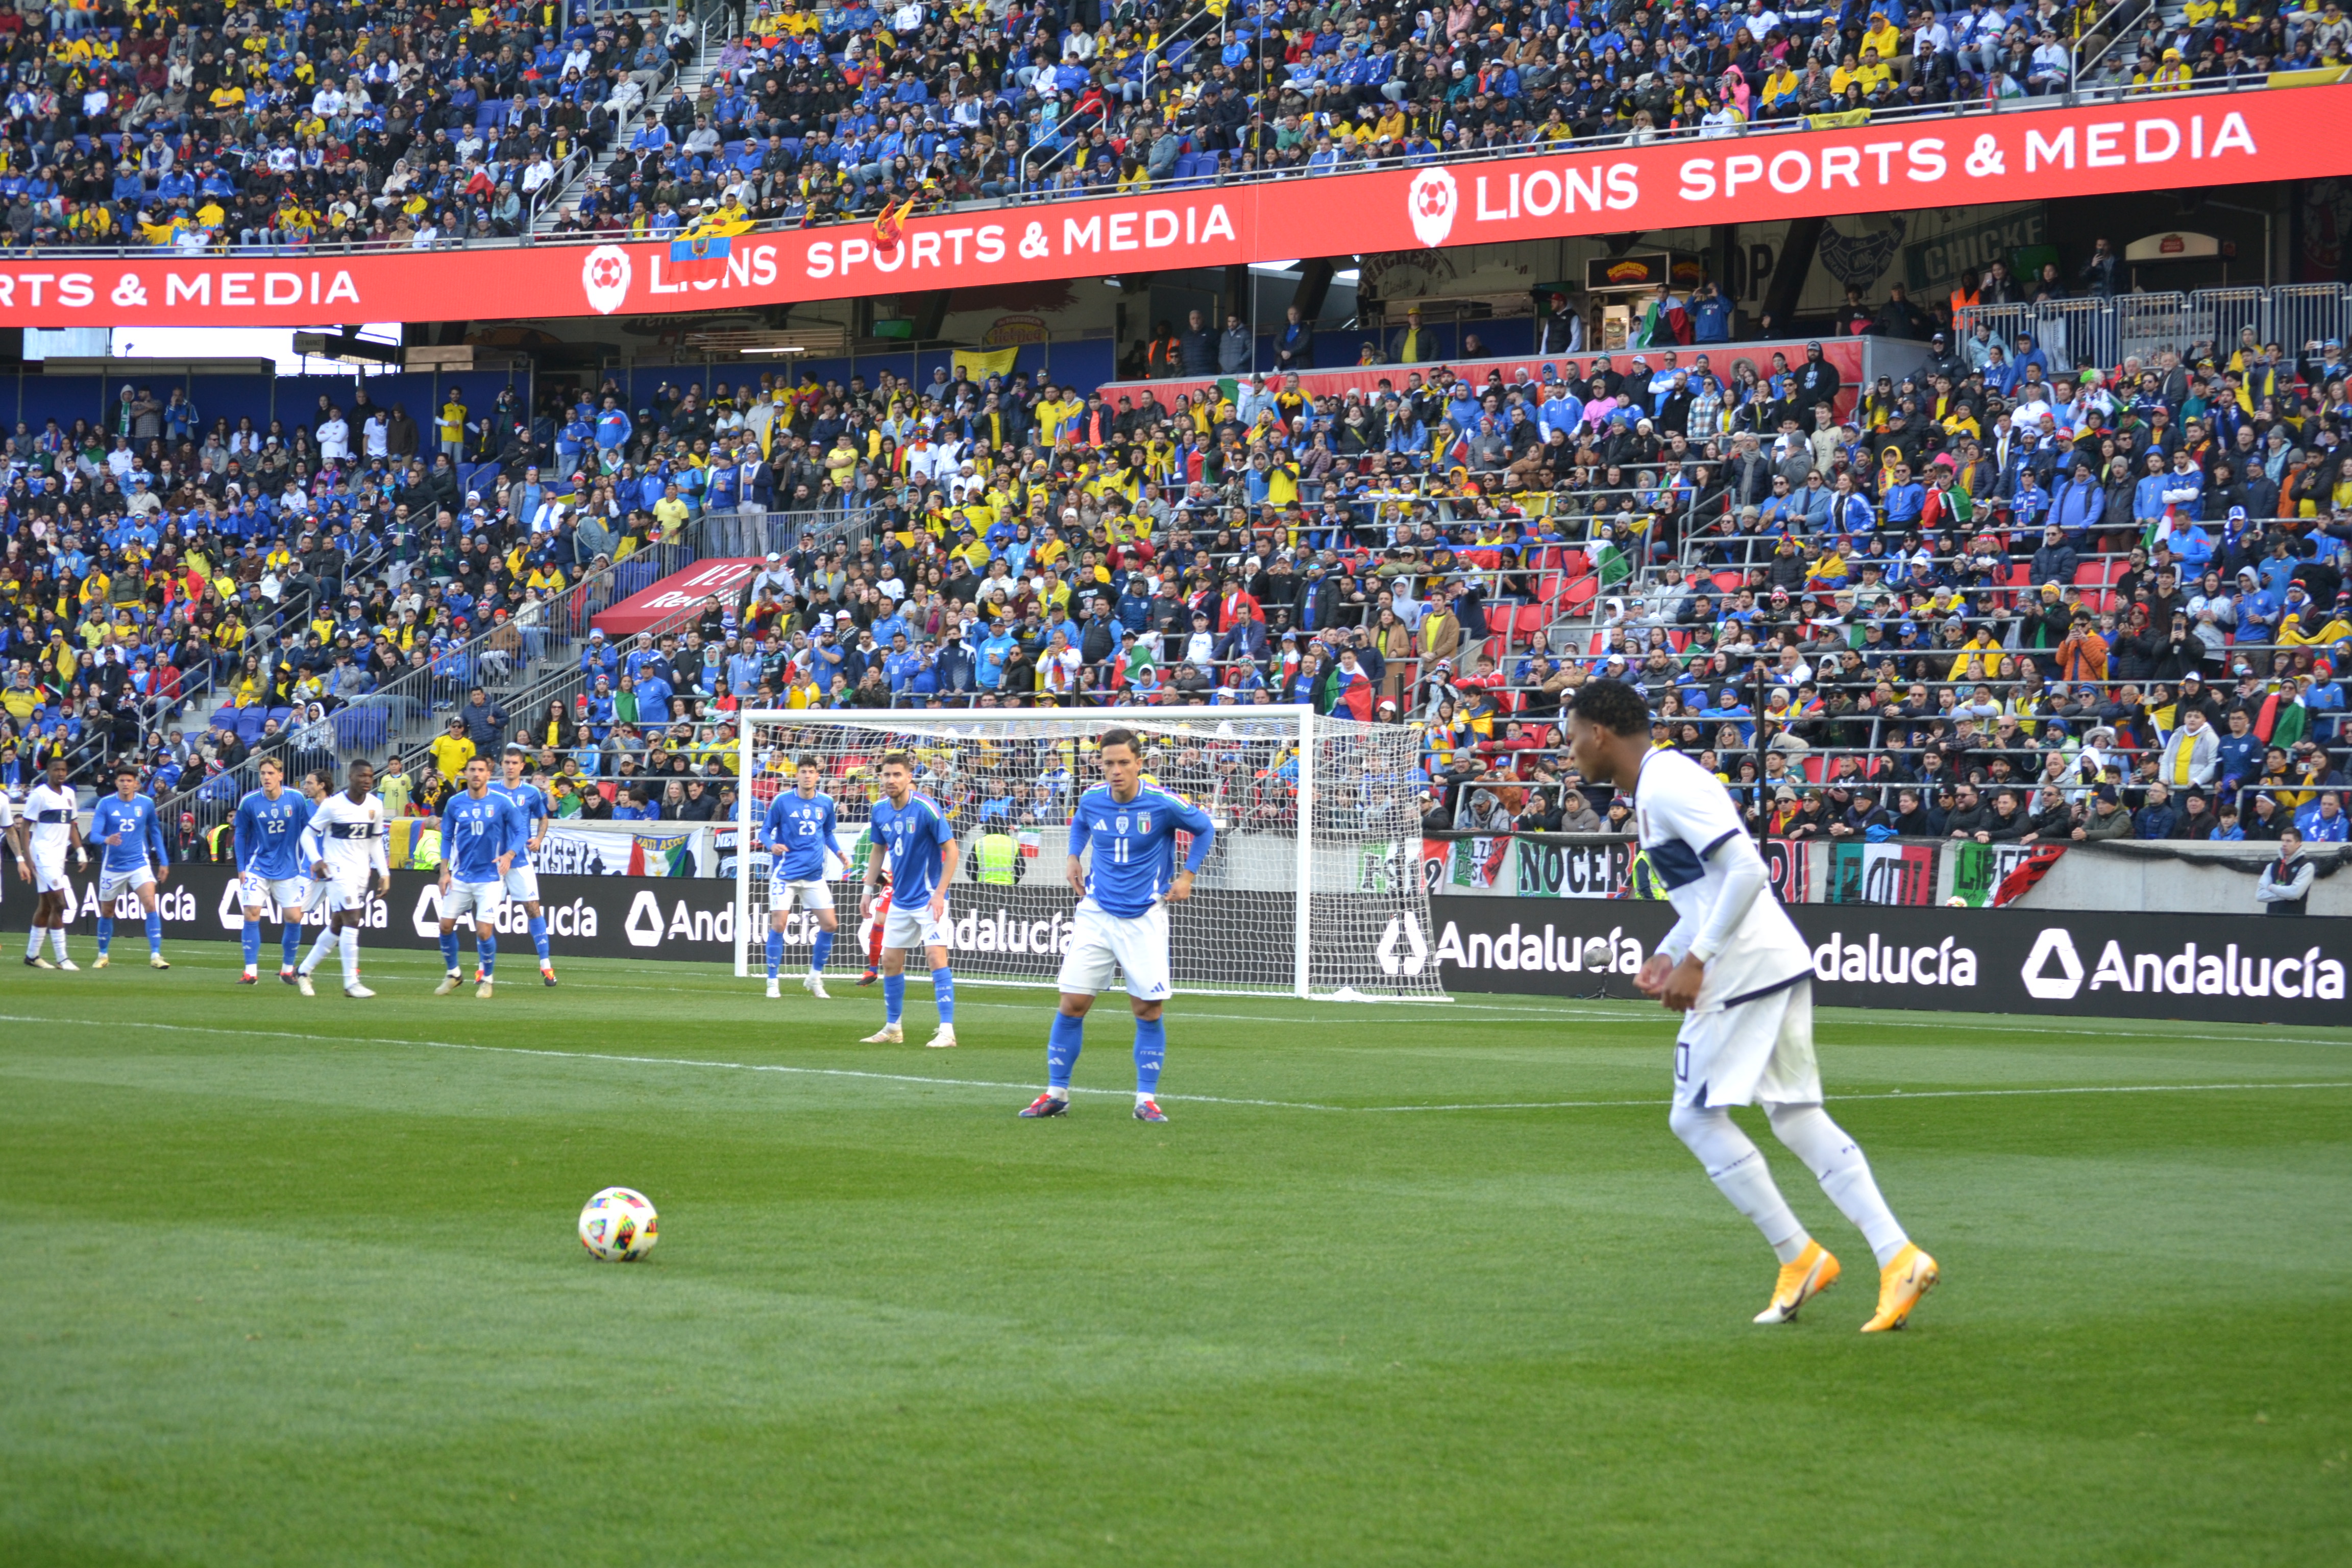 Italy and Ecuador meet again in a historic match at Red Bull Arena